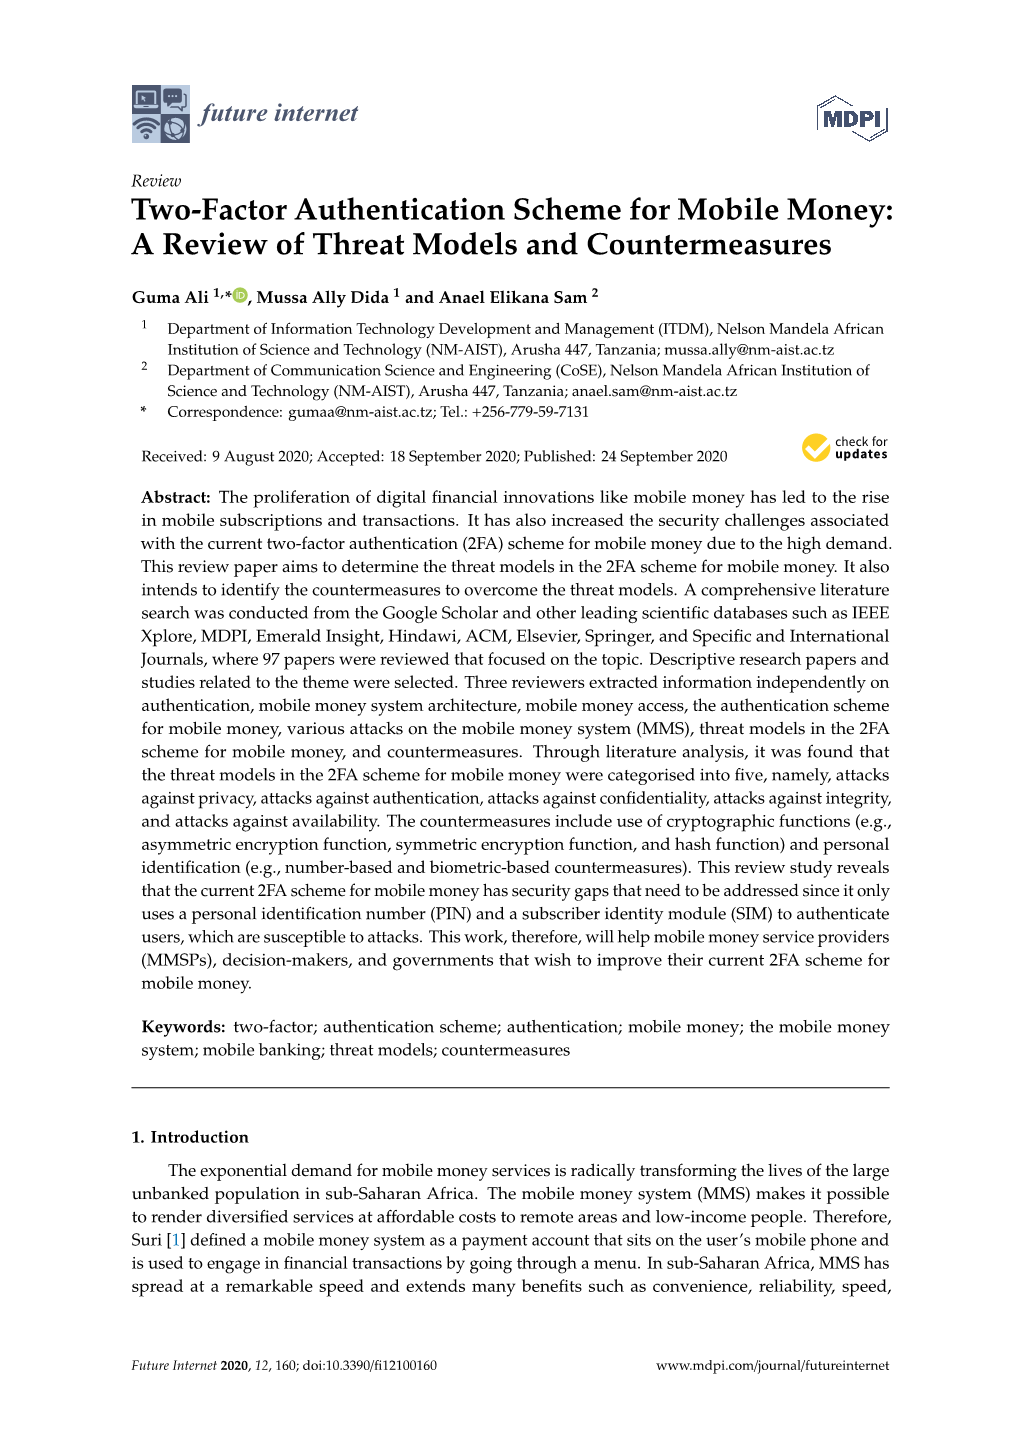 Two-Factor Authentication Scheme for Mobile Money: a Review of Threat Models and Countermeasures